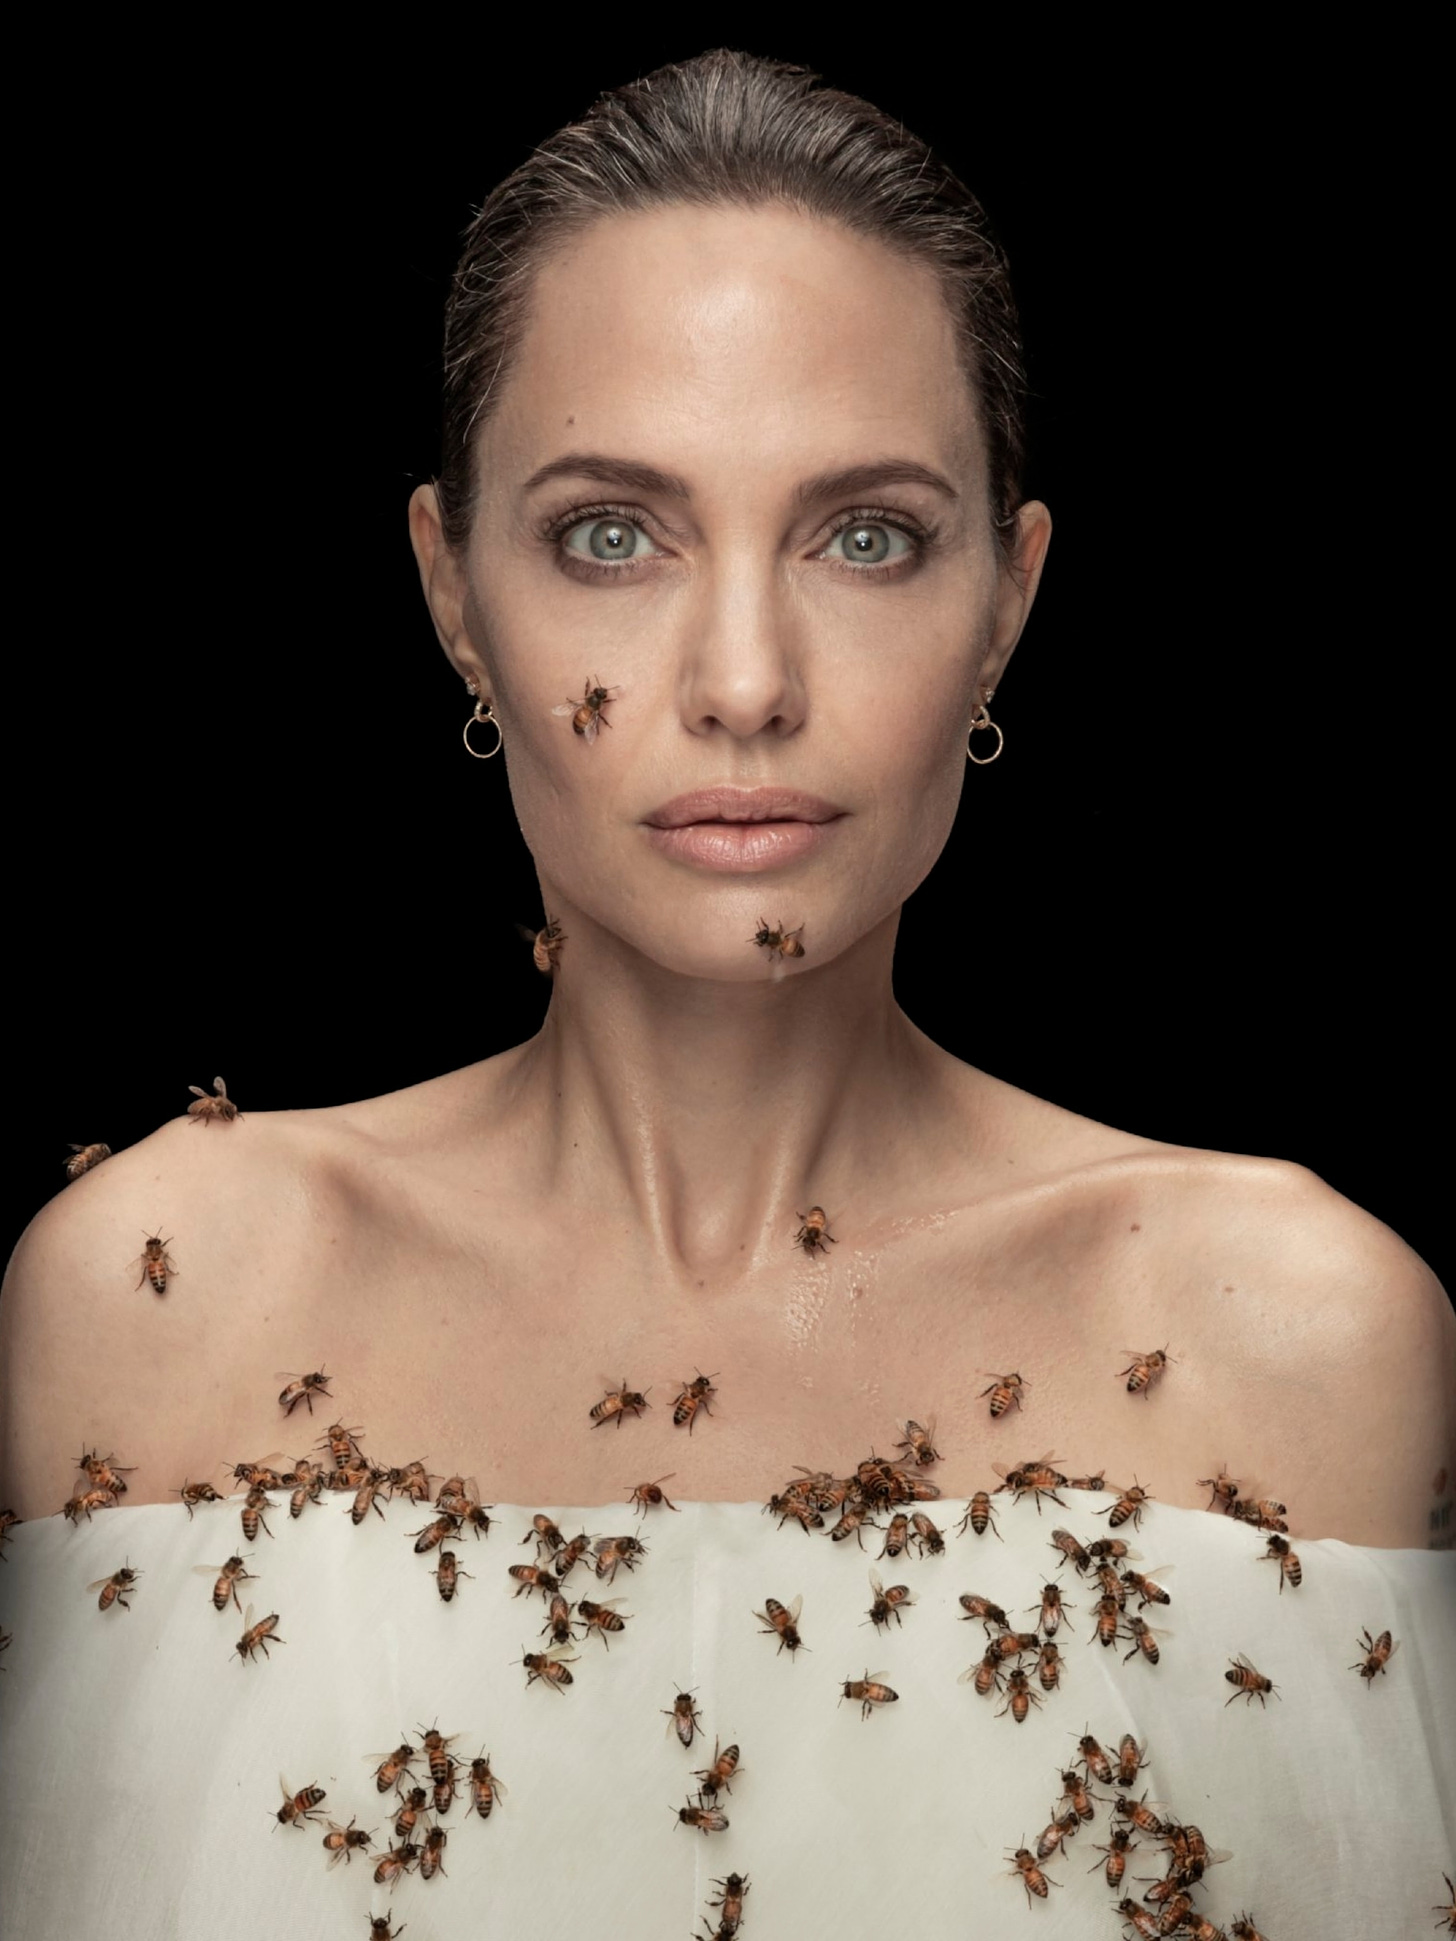 a studio portrait of Angelina Jolie with a group of bees resting on her